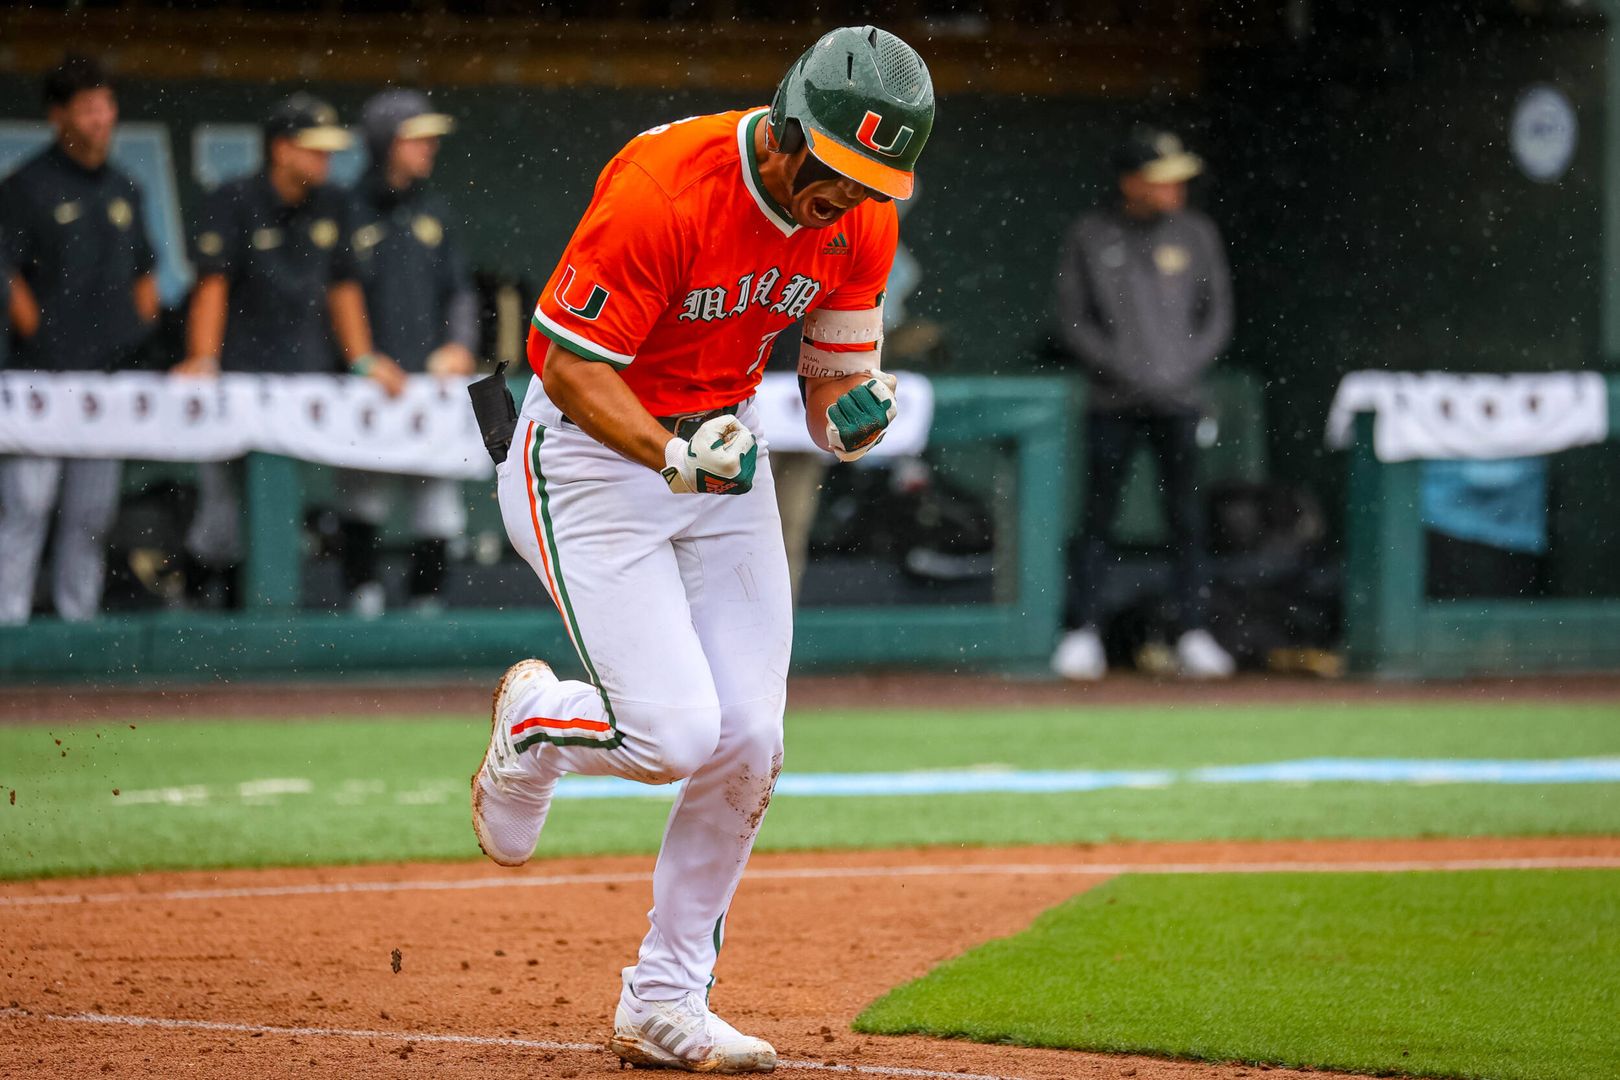 Fourth-Seeded Miami Knocks off Top-Seeded Wake Forest, Advances to Title Game